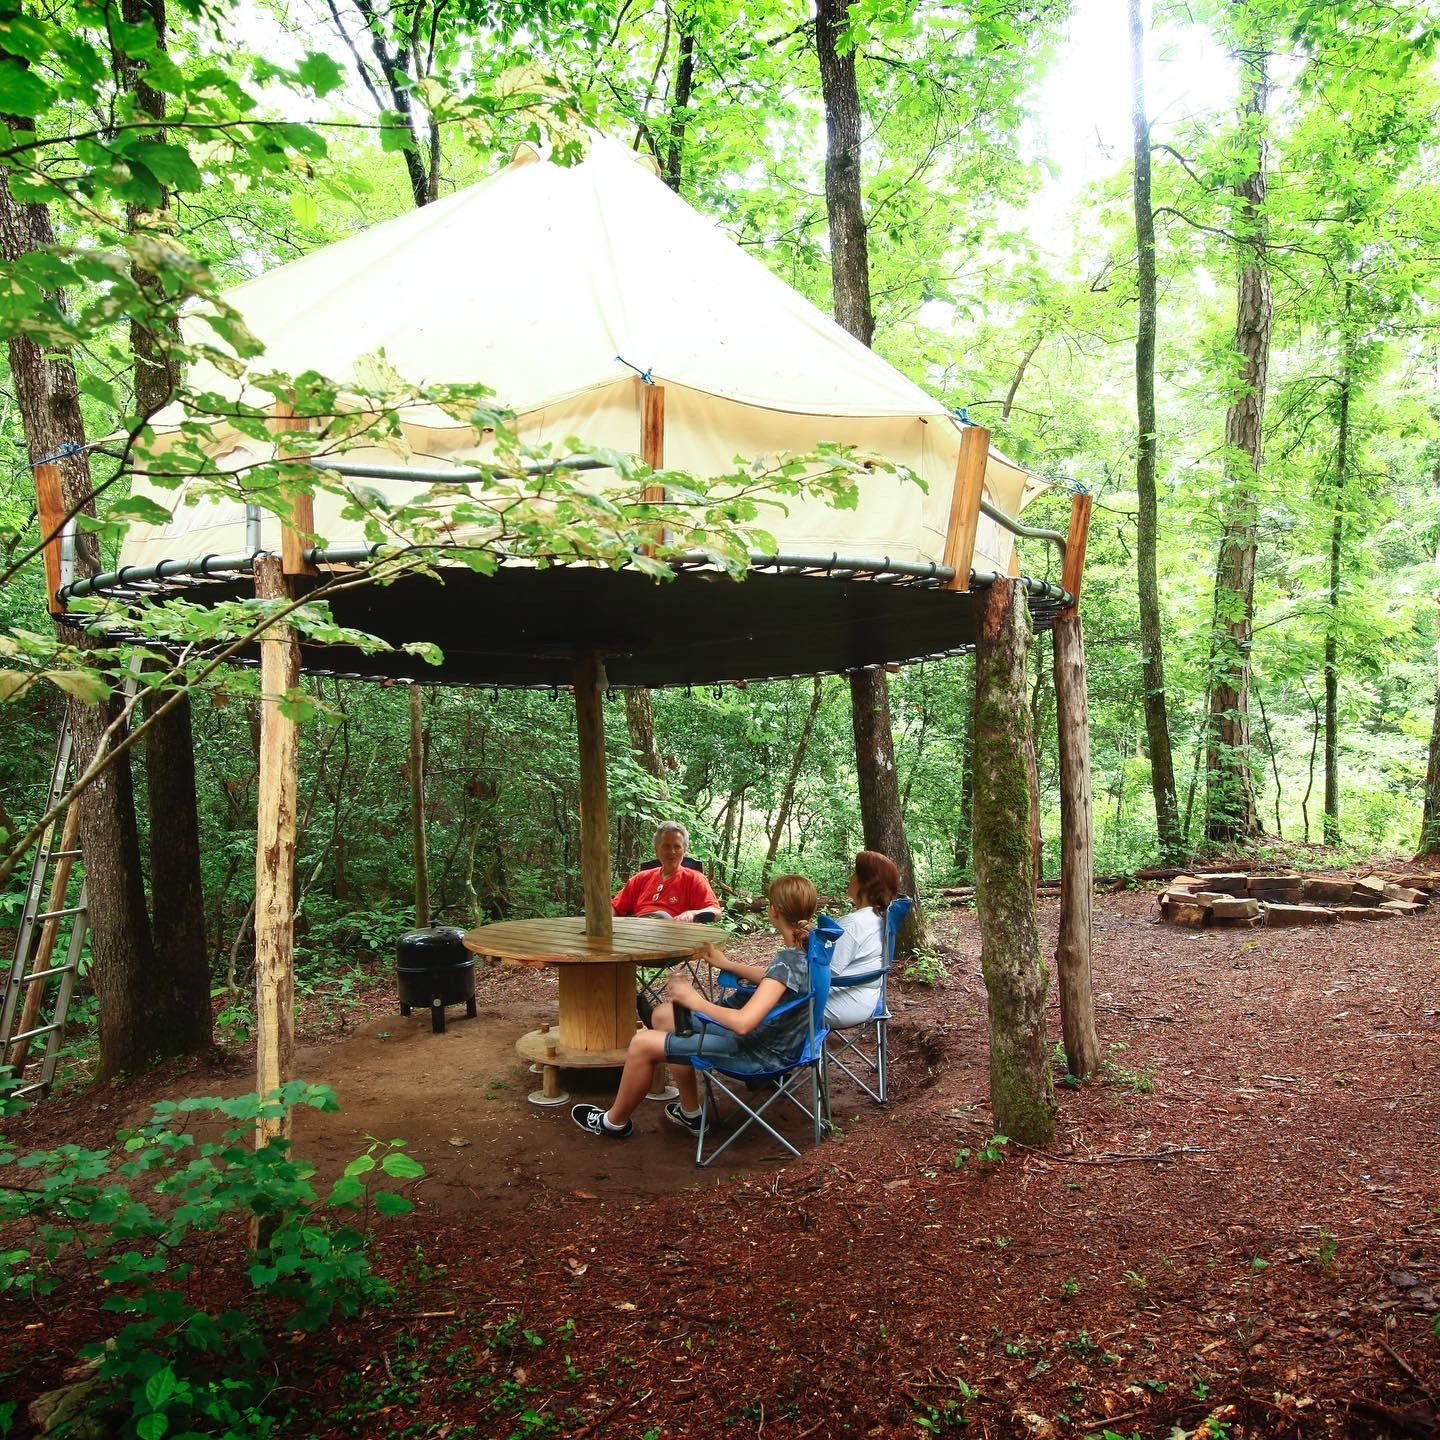 A group of people are sitting under a tent in the woods